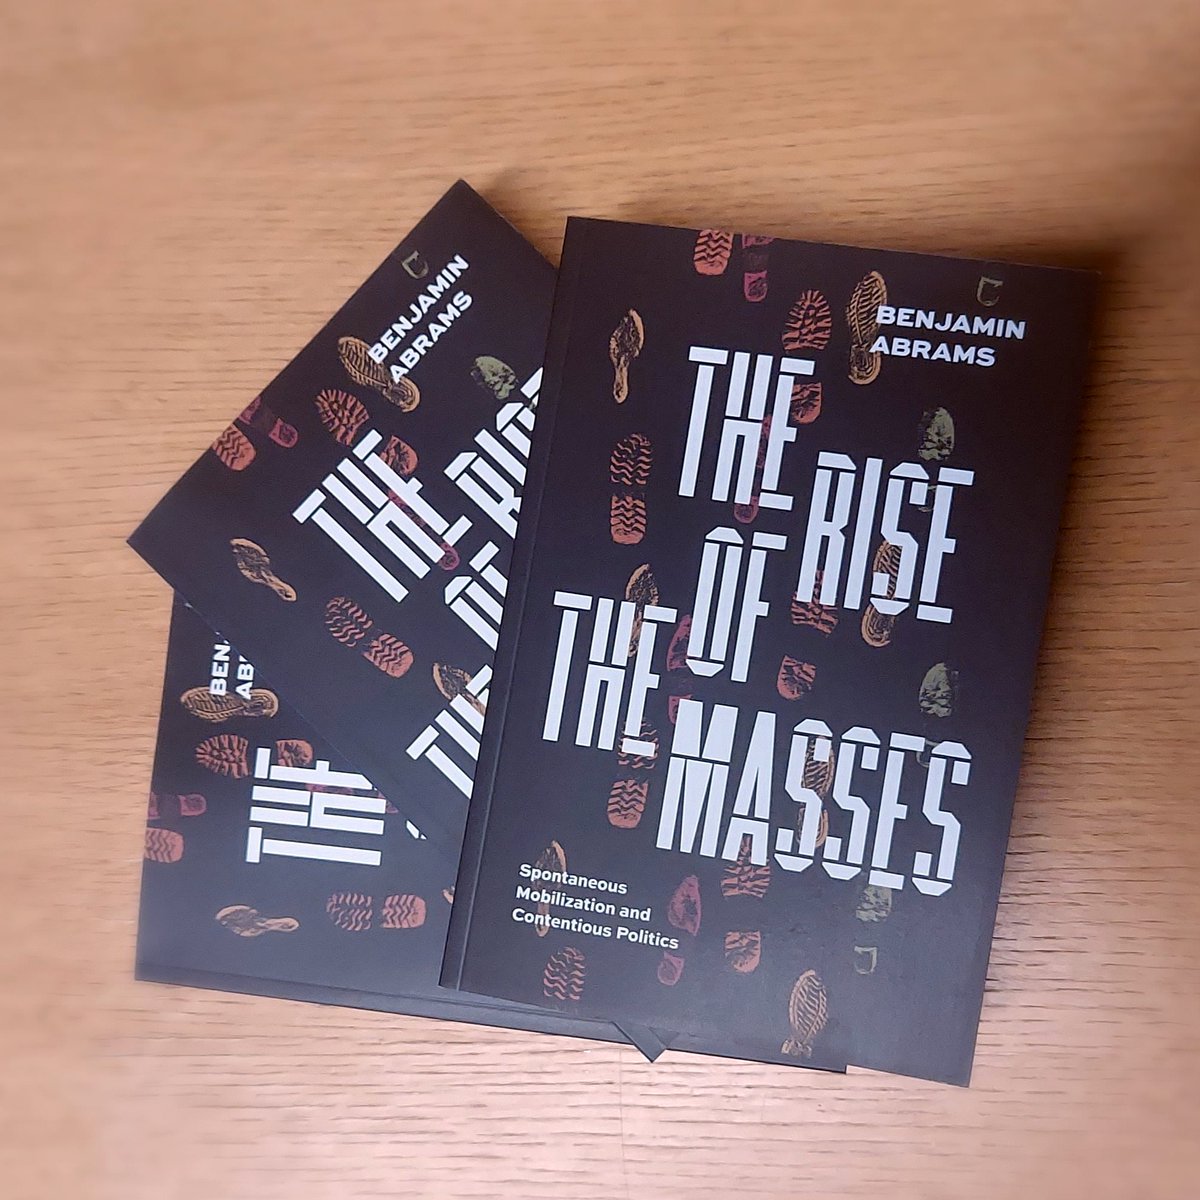 Countdown begins!  My book, The Rise of the Masses, releases this week: Friday, June 9.  

Delve into why and how mass protests erupted in the 2020 #BlackLivesMatter uprising, Egypt's #Jan25 Revolution, #OccupyWallStreet,  and the 1789 French Revolution. 

 Stay tuned for more!